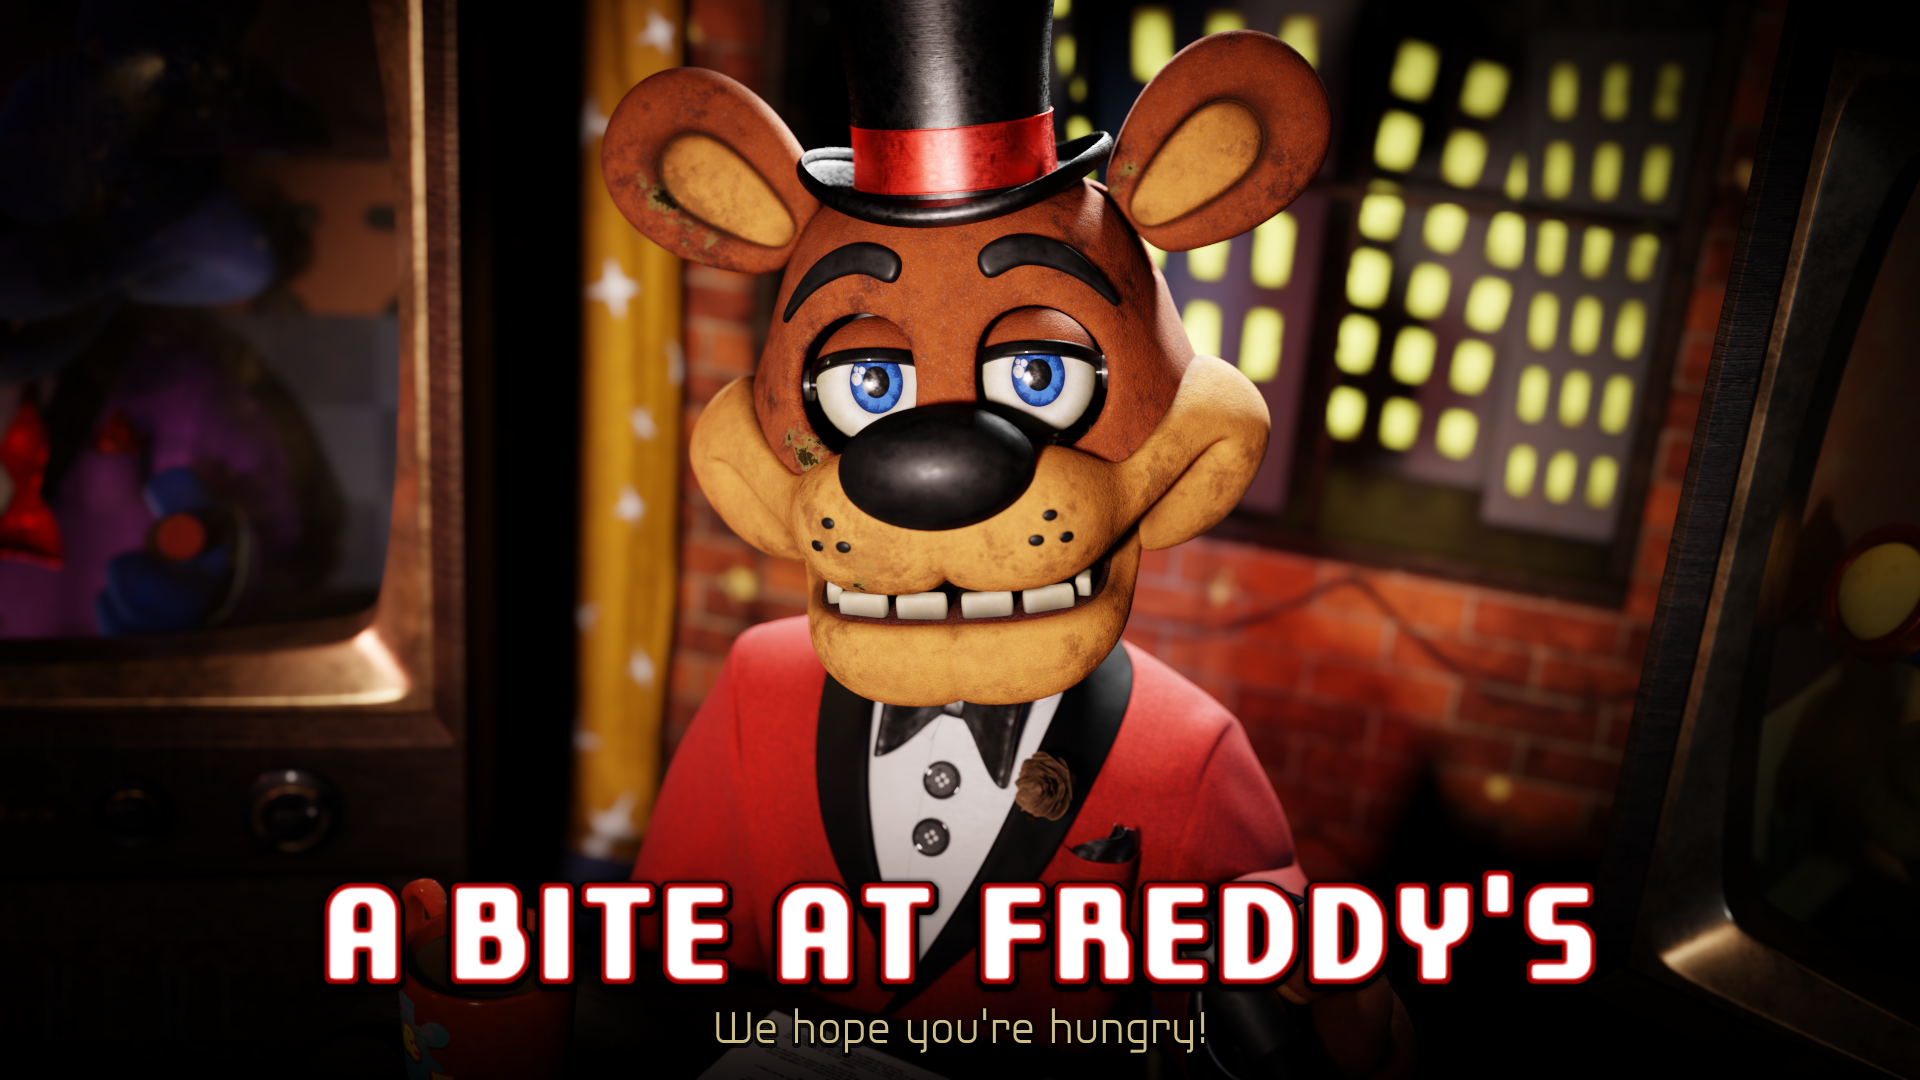 A Bite at Freddy's - Out now on Gamejolt!